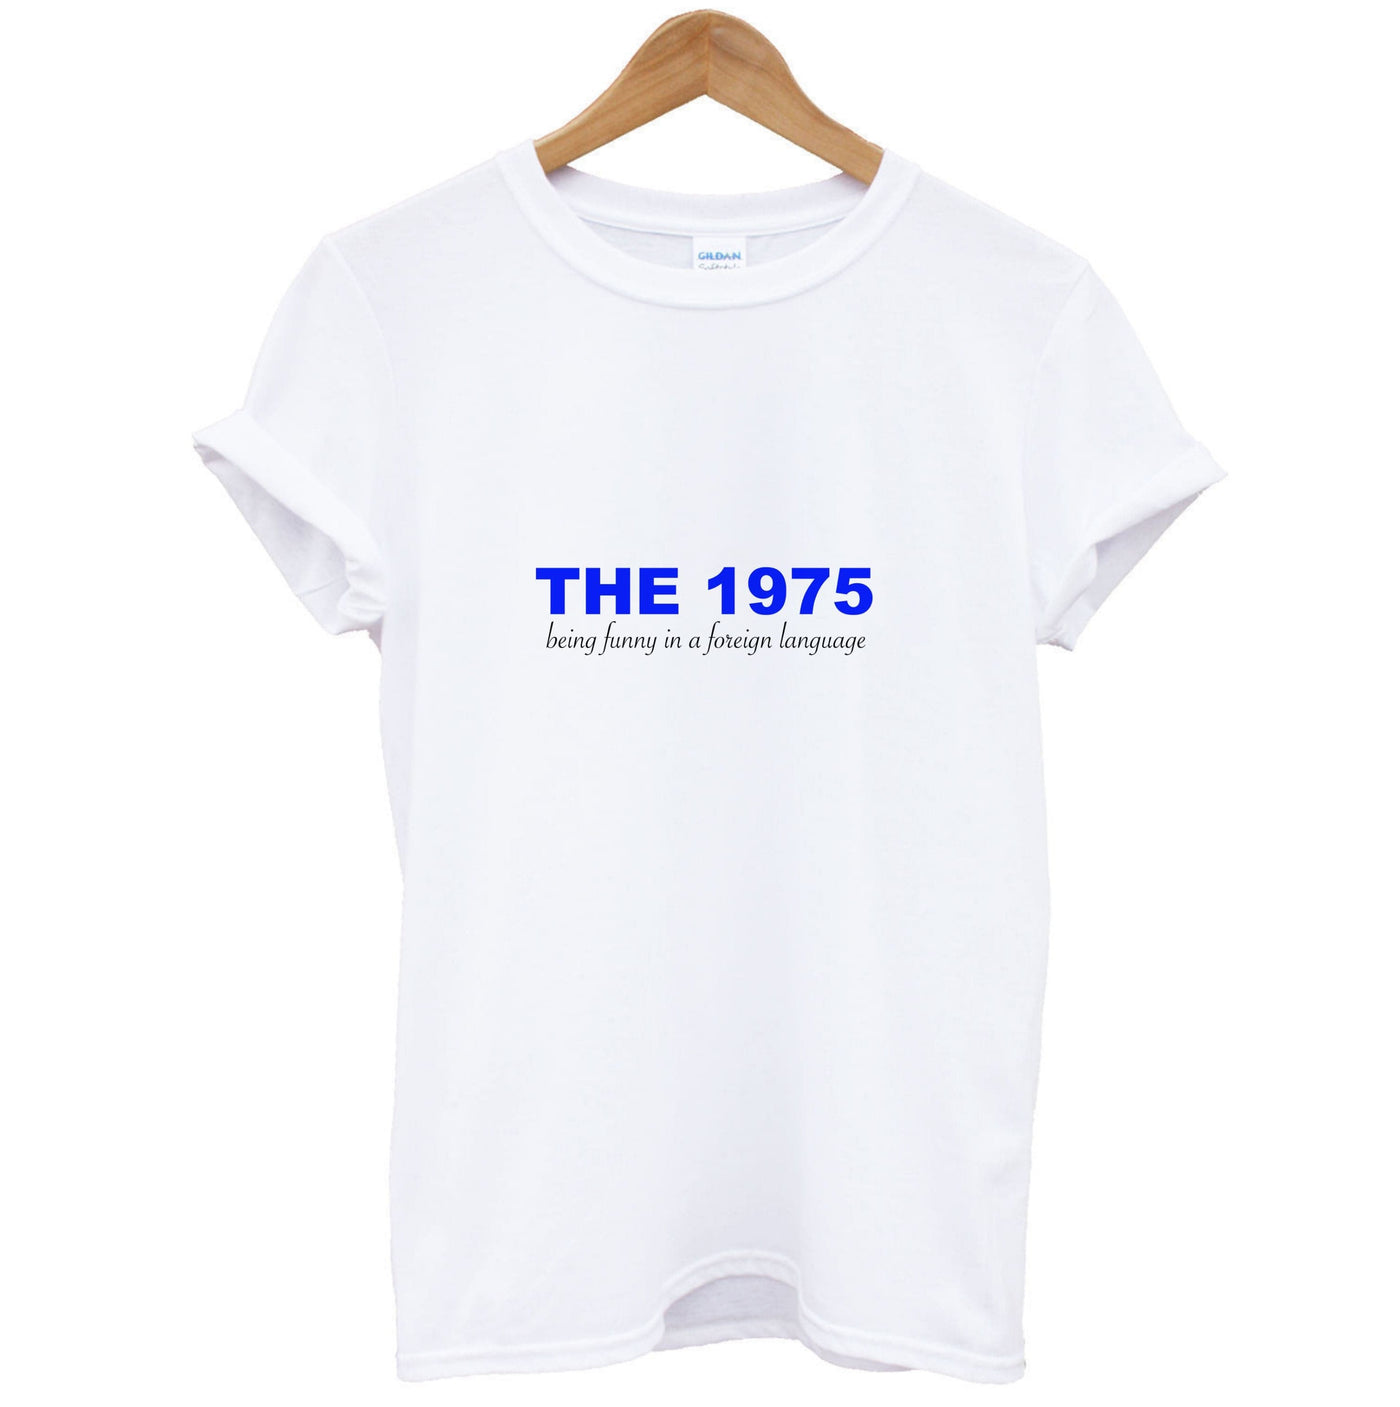 Being Funny - The 1975 T-Shirt